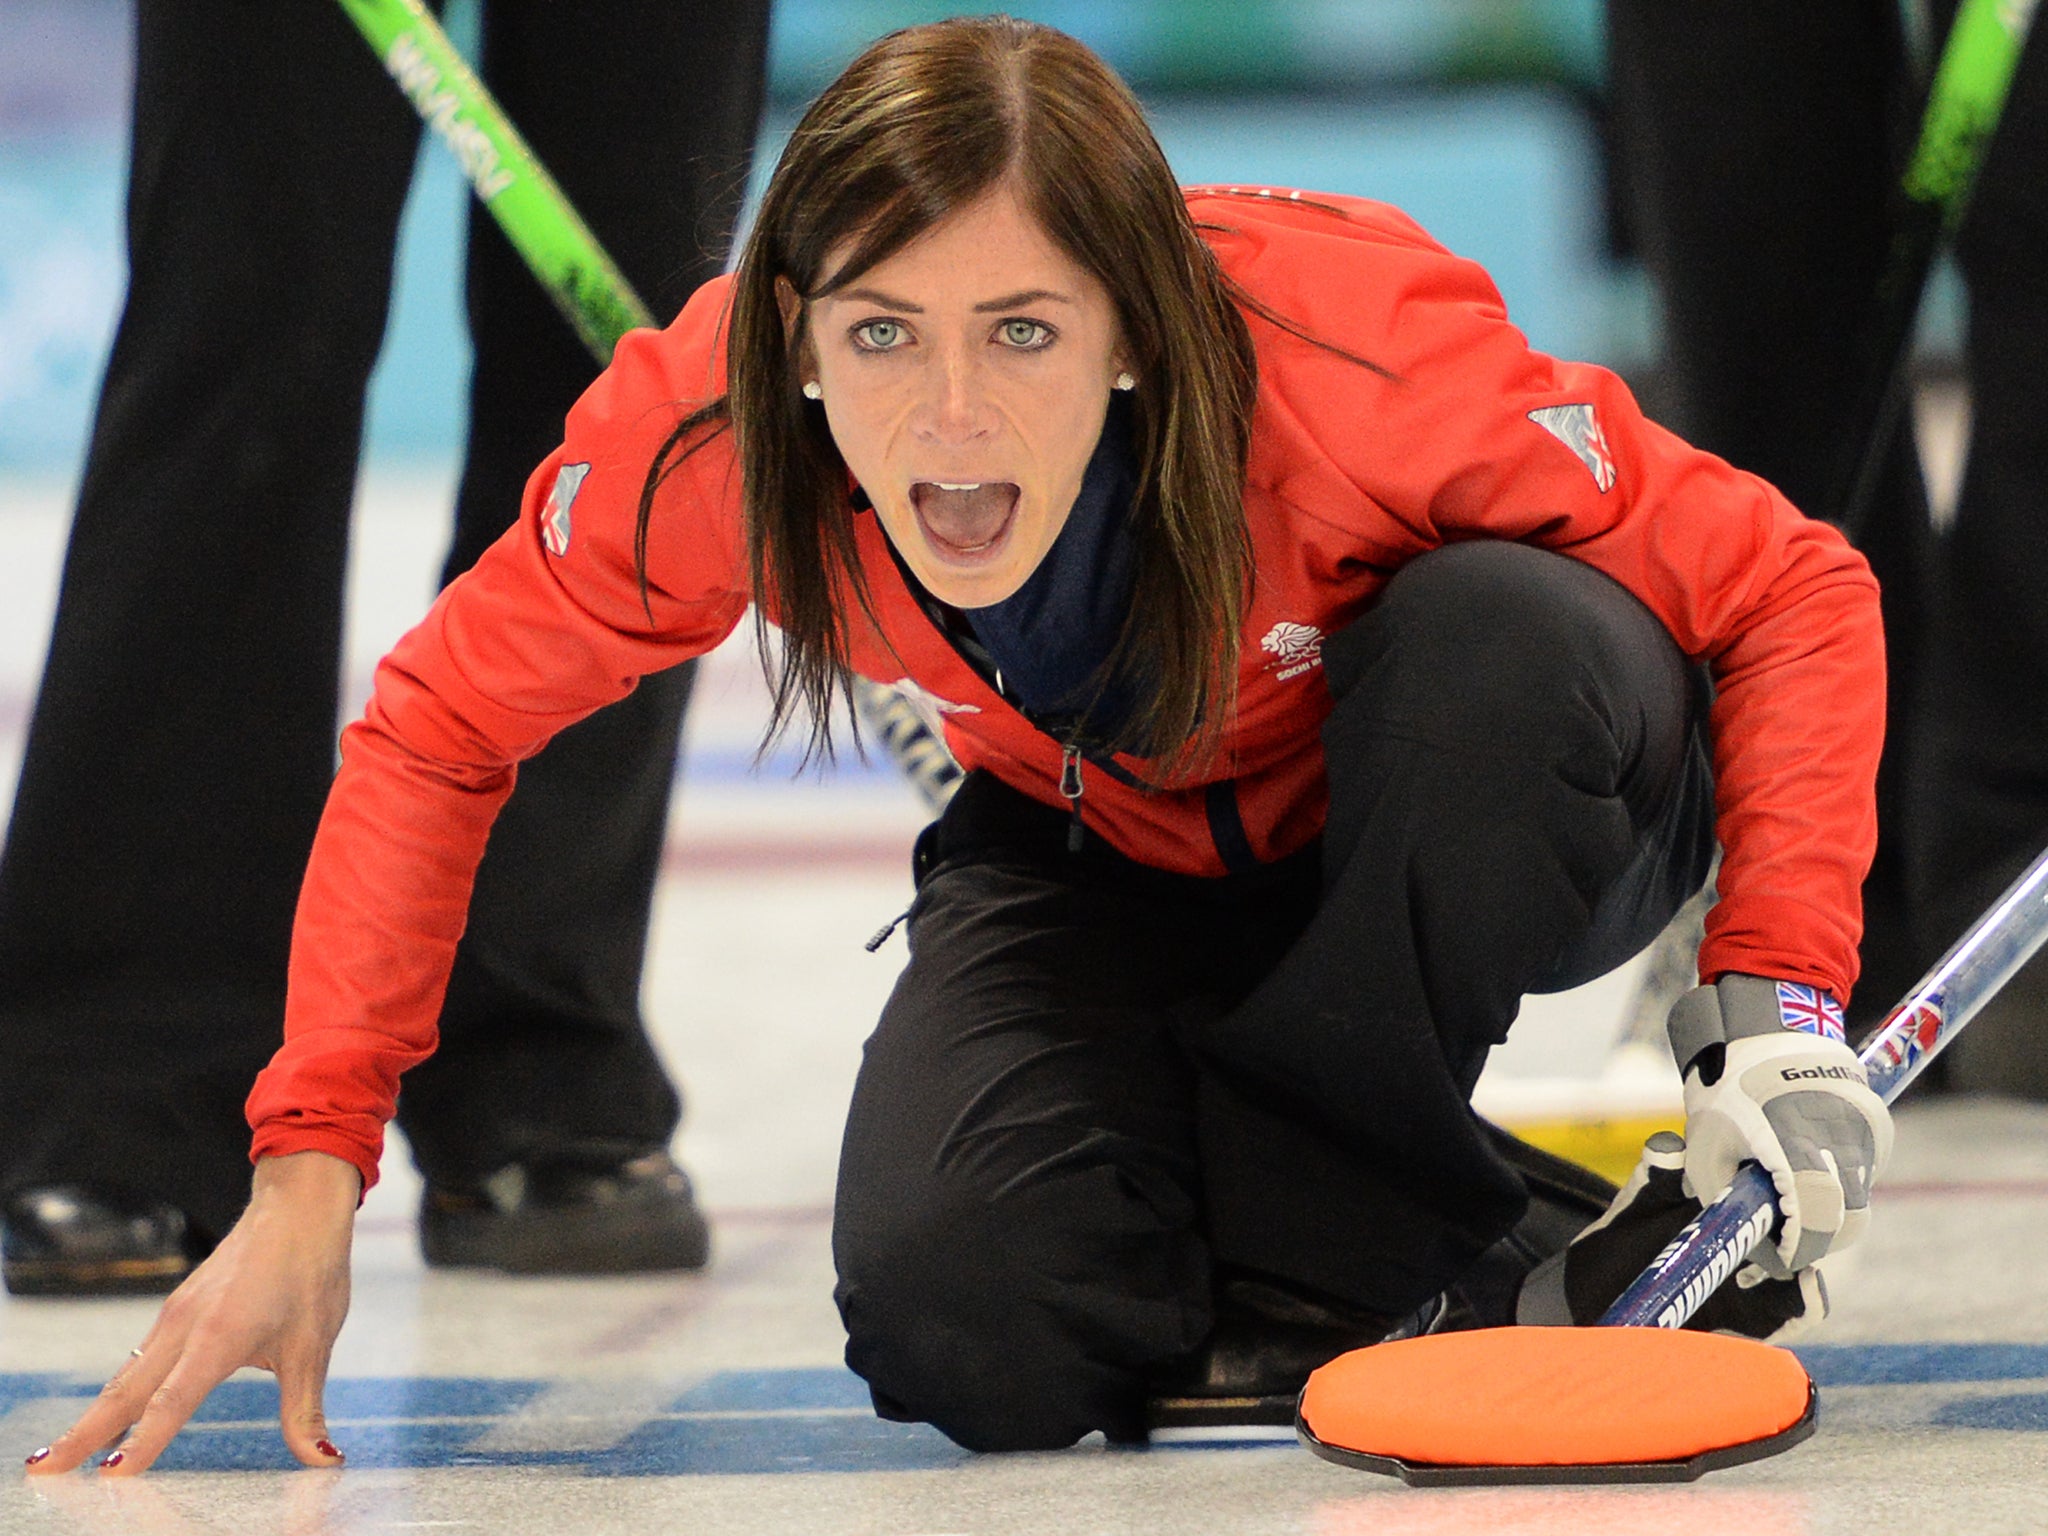 Great Britain women's curling team captain Eve Muirfield took three shots on the hammer to win their match with South Korea 10-8